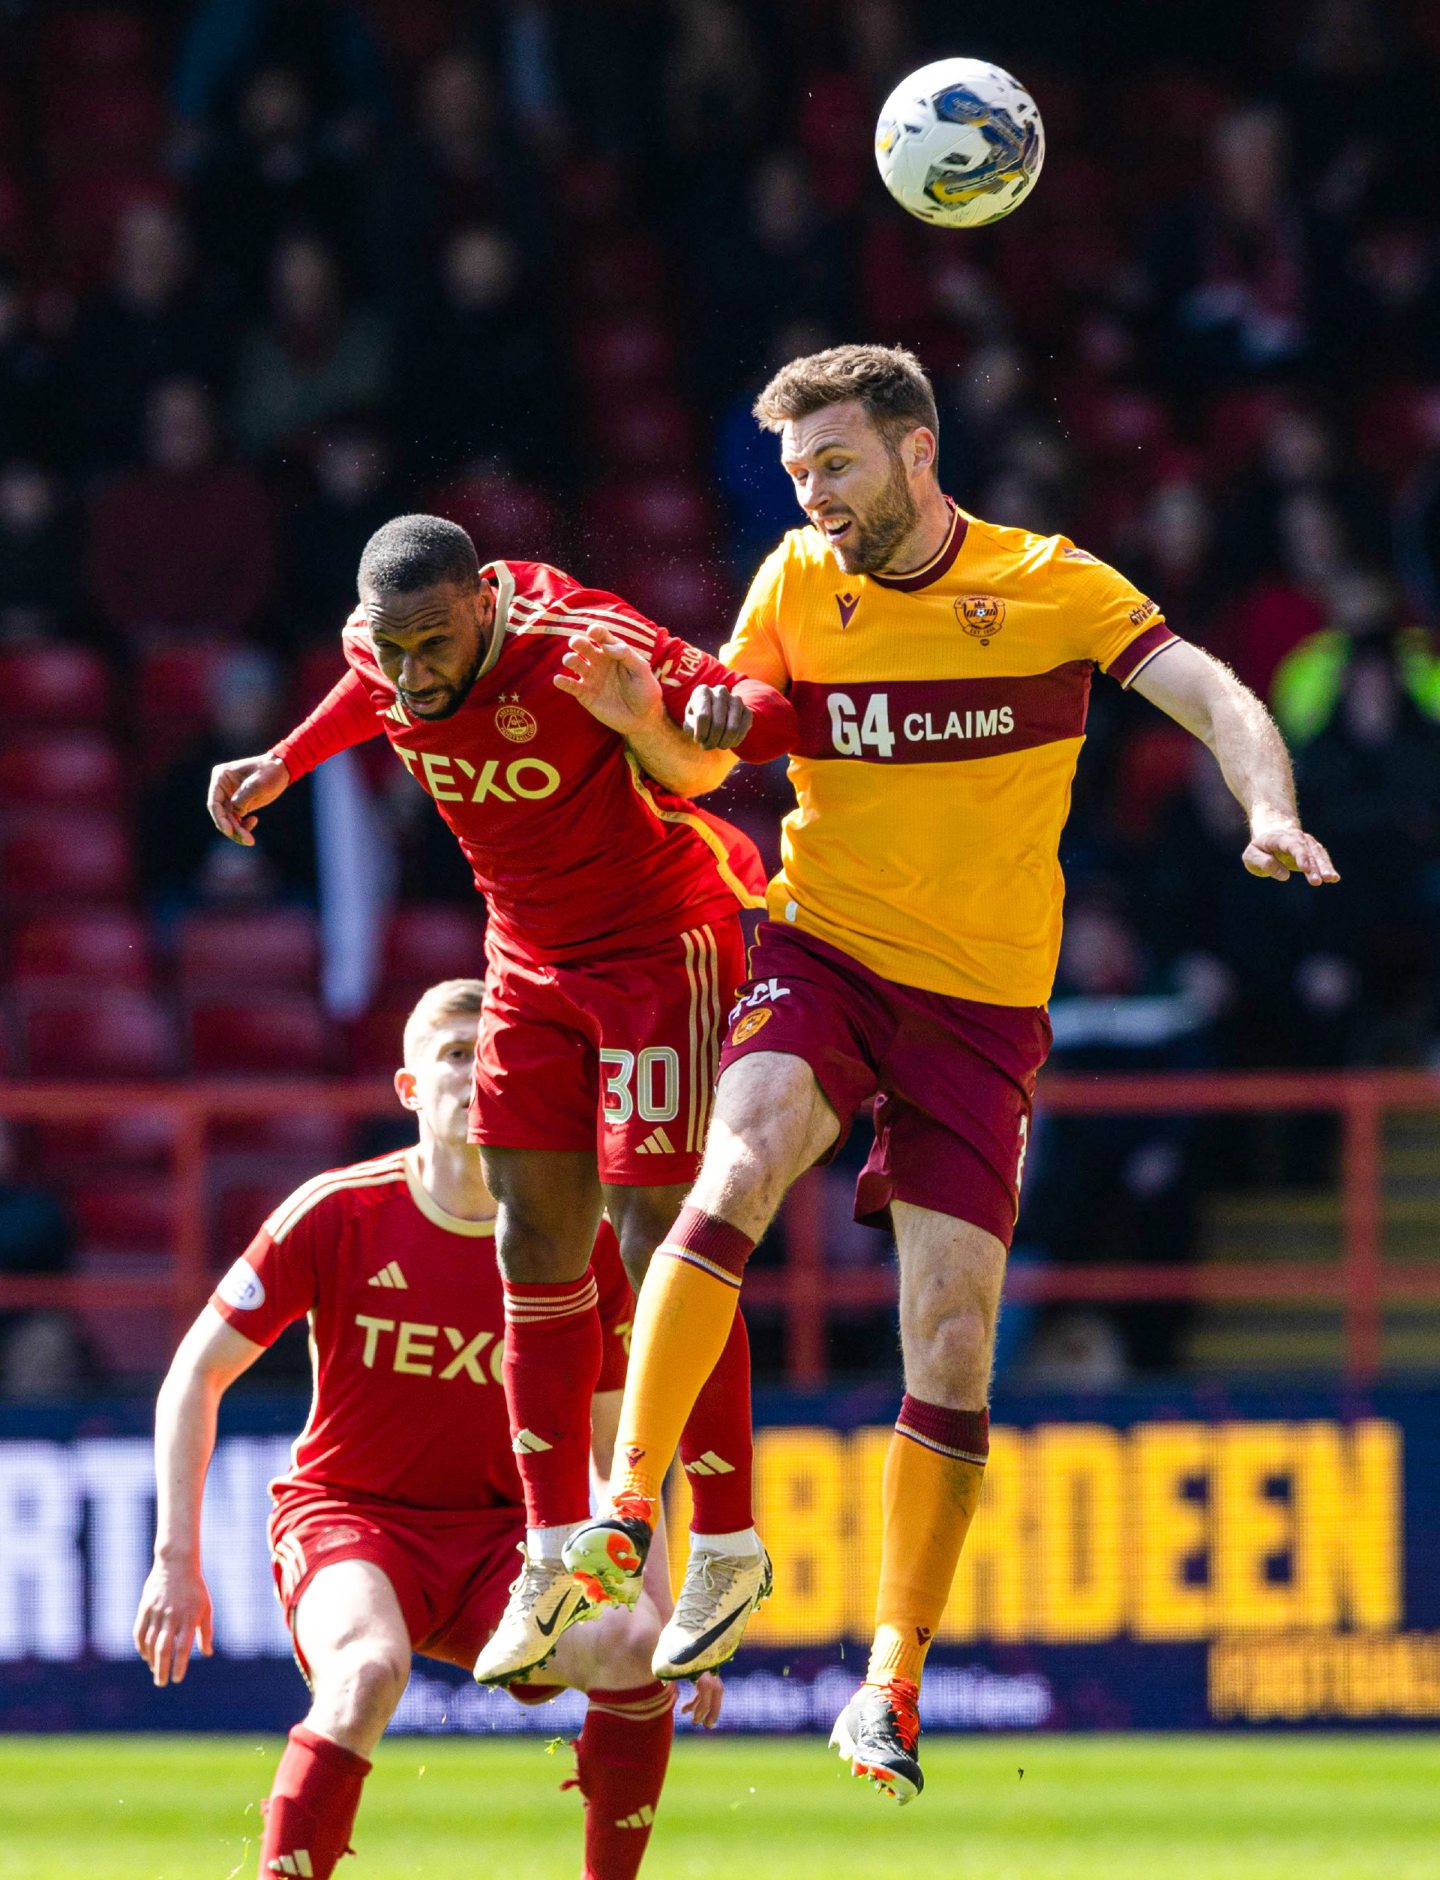 Aberdeen's Junior Hoilett and Motherwell's Stephen O'Donnell in action at Pittodrie.